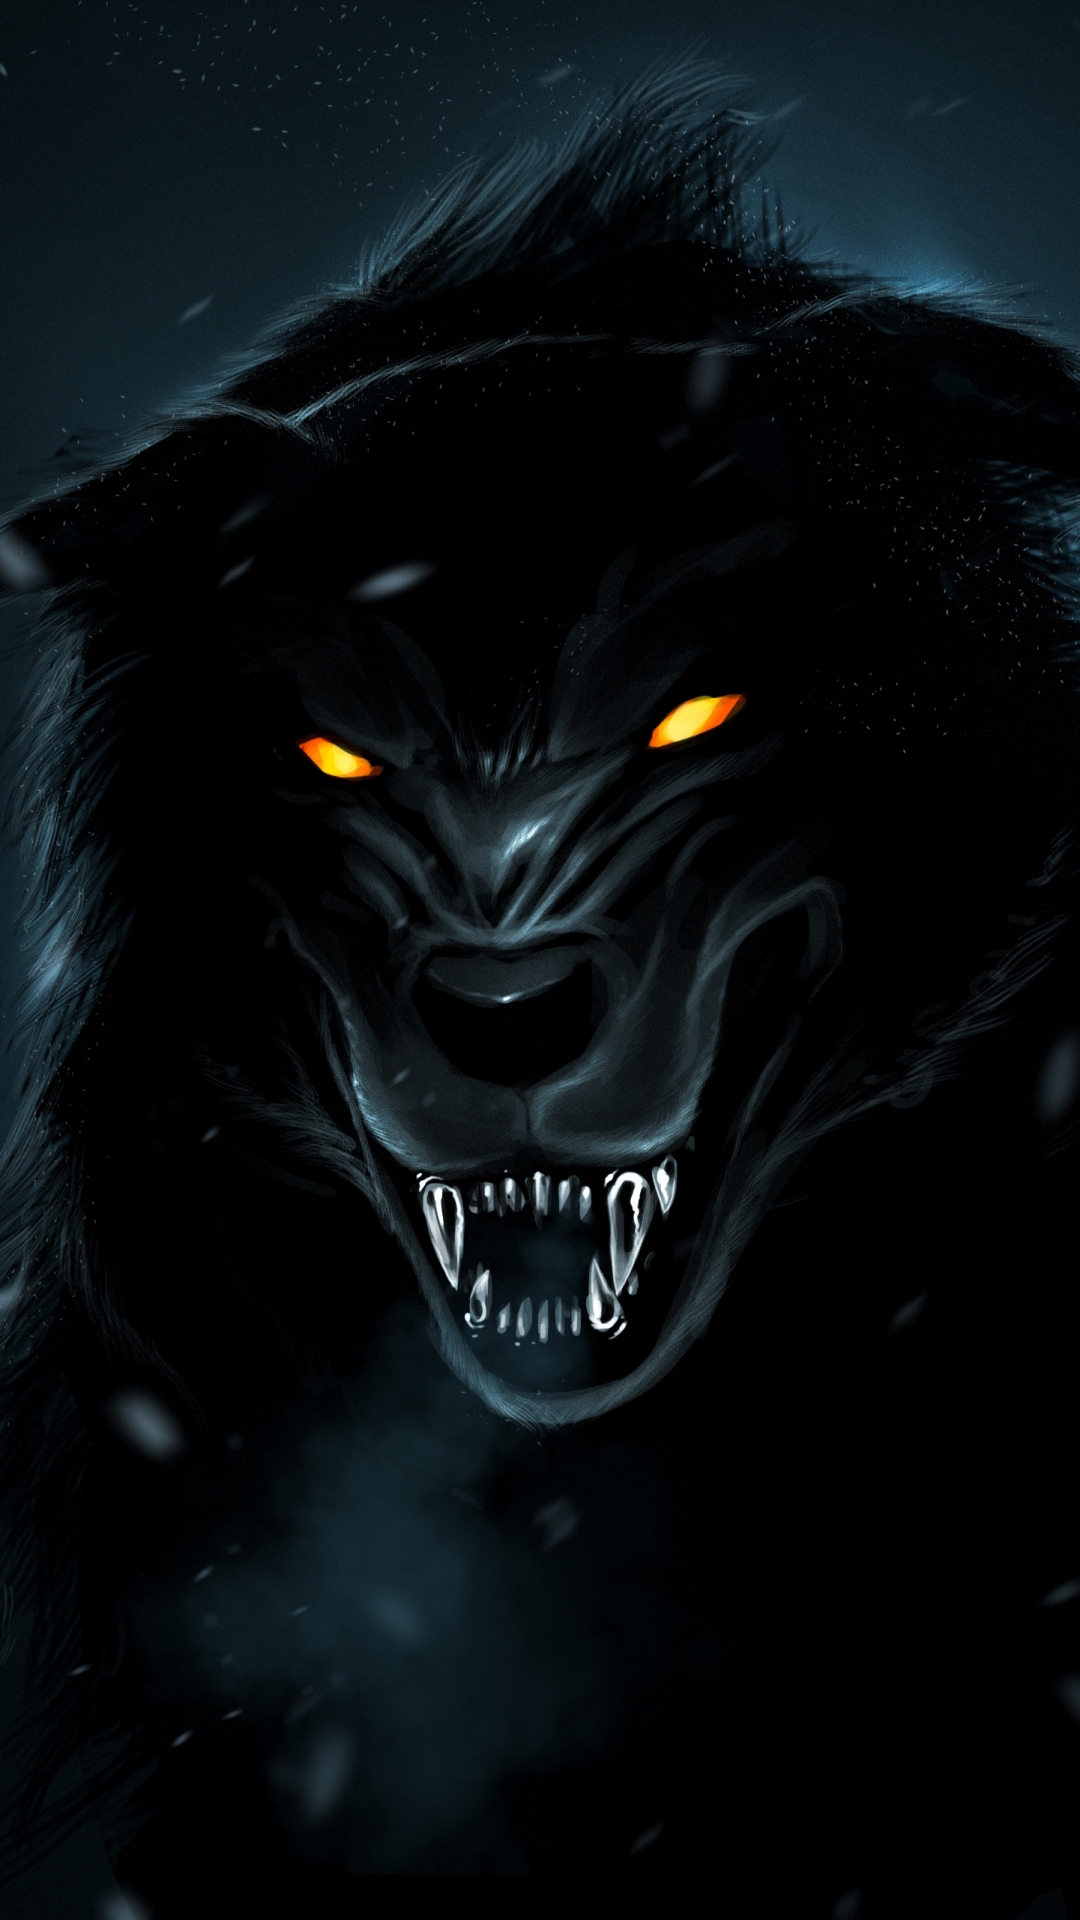 Black Lion And Black Wolf - HD Wallpaper 